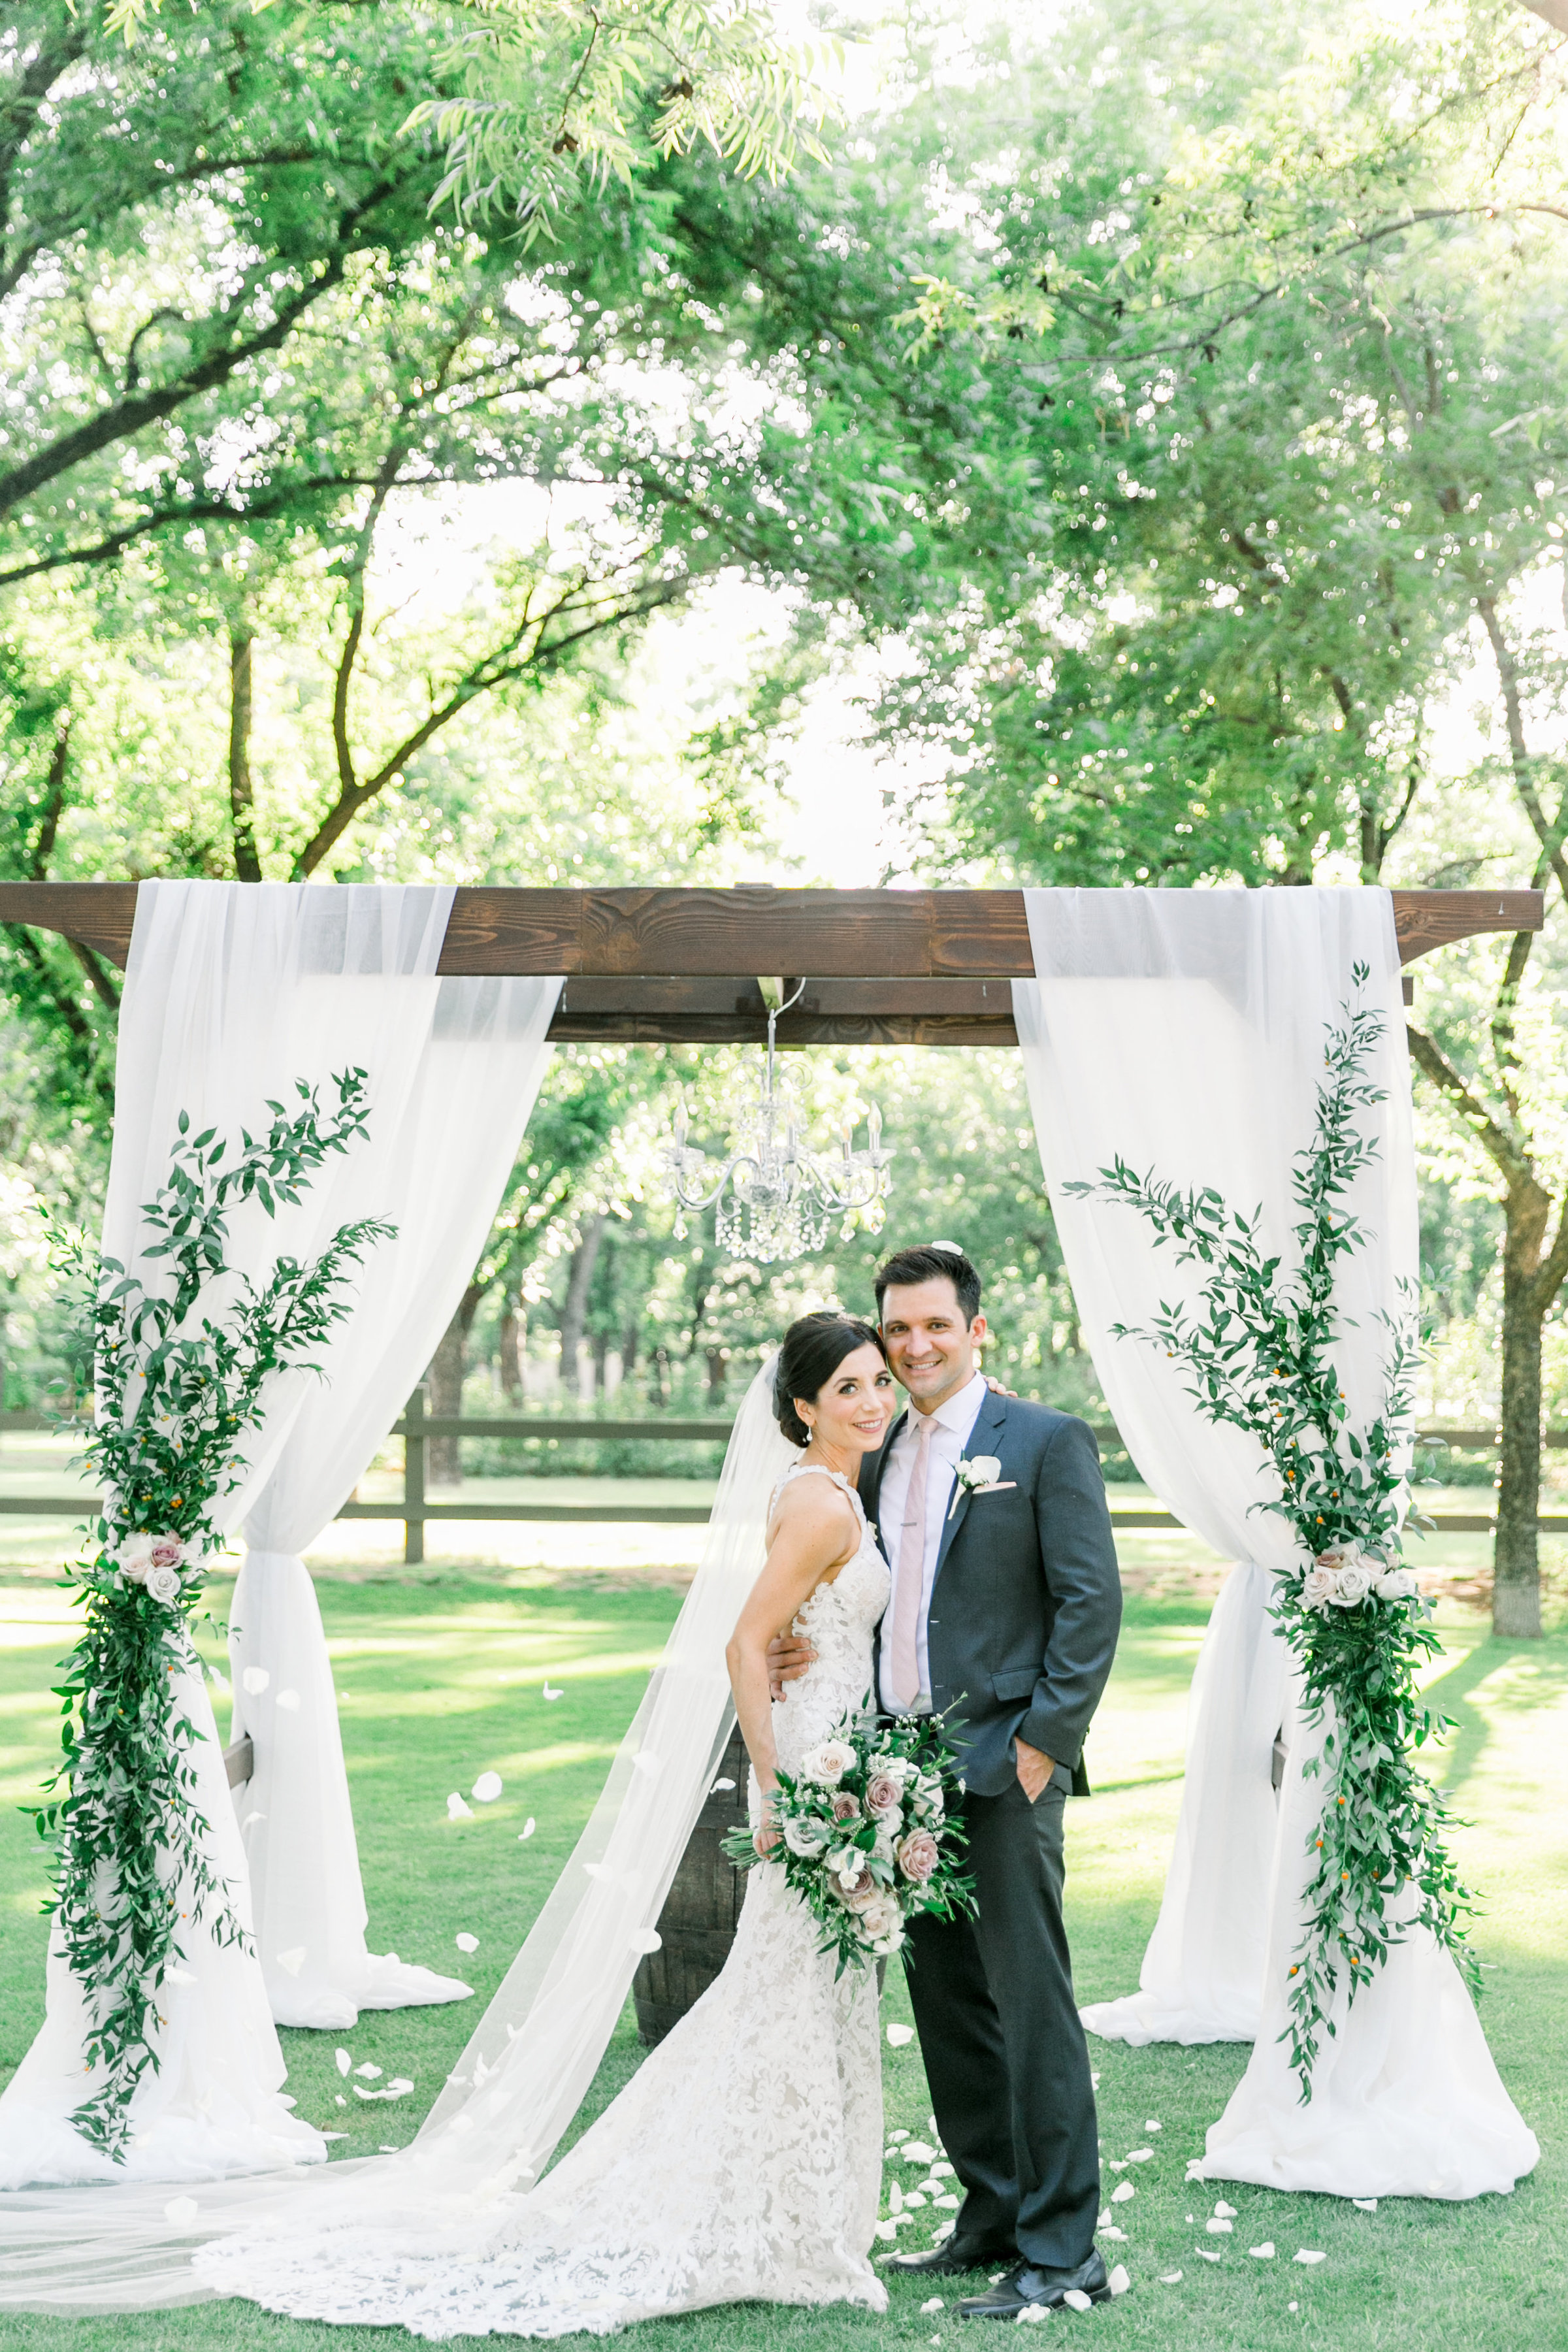 Karlie Colleen Photography - Venue At The Grove - Arizona Wedding - Maggie & Grant -73